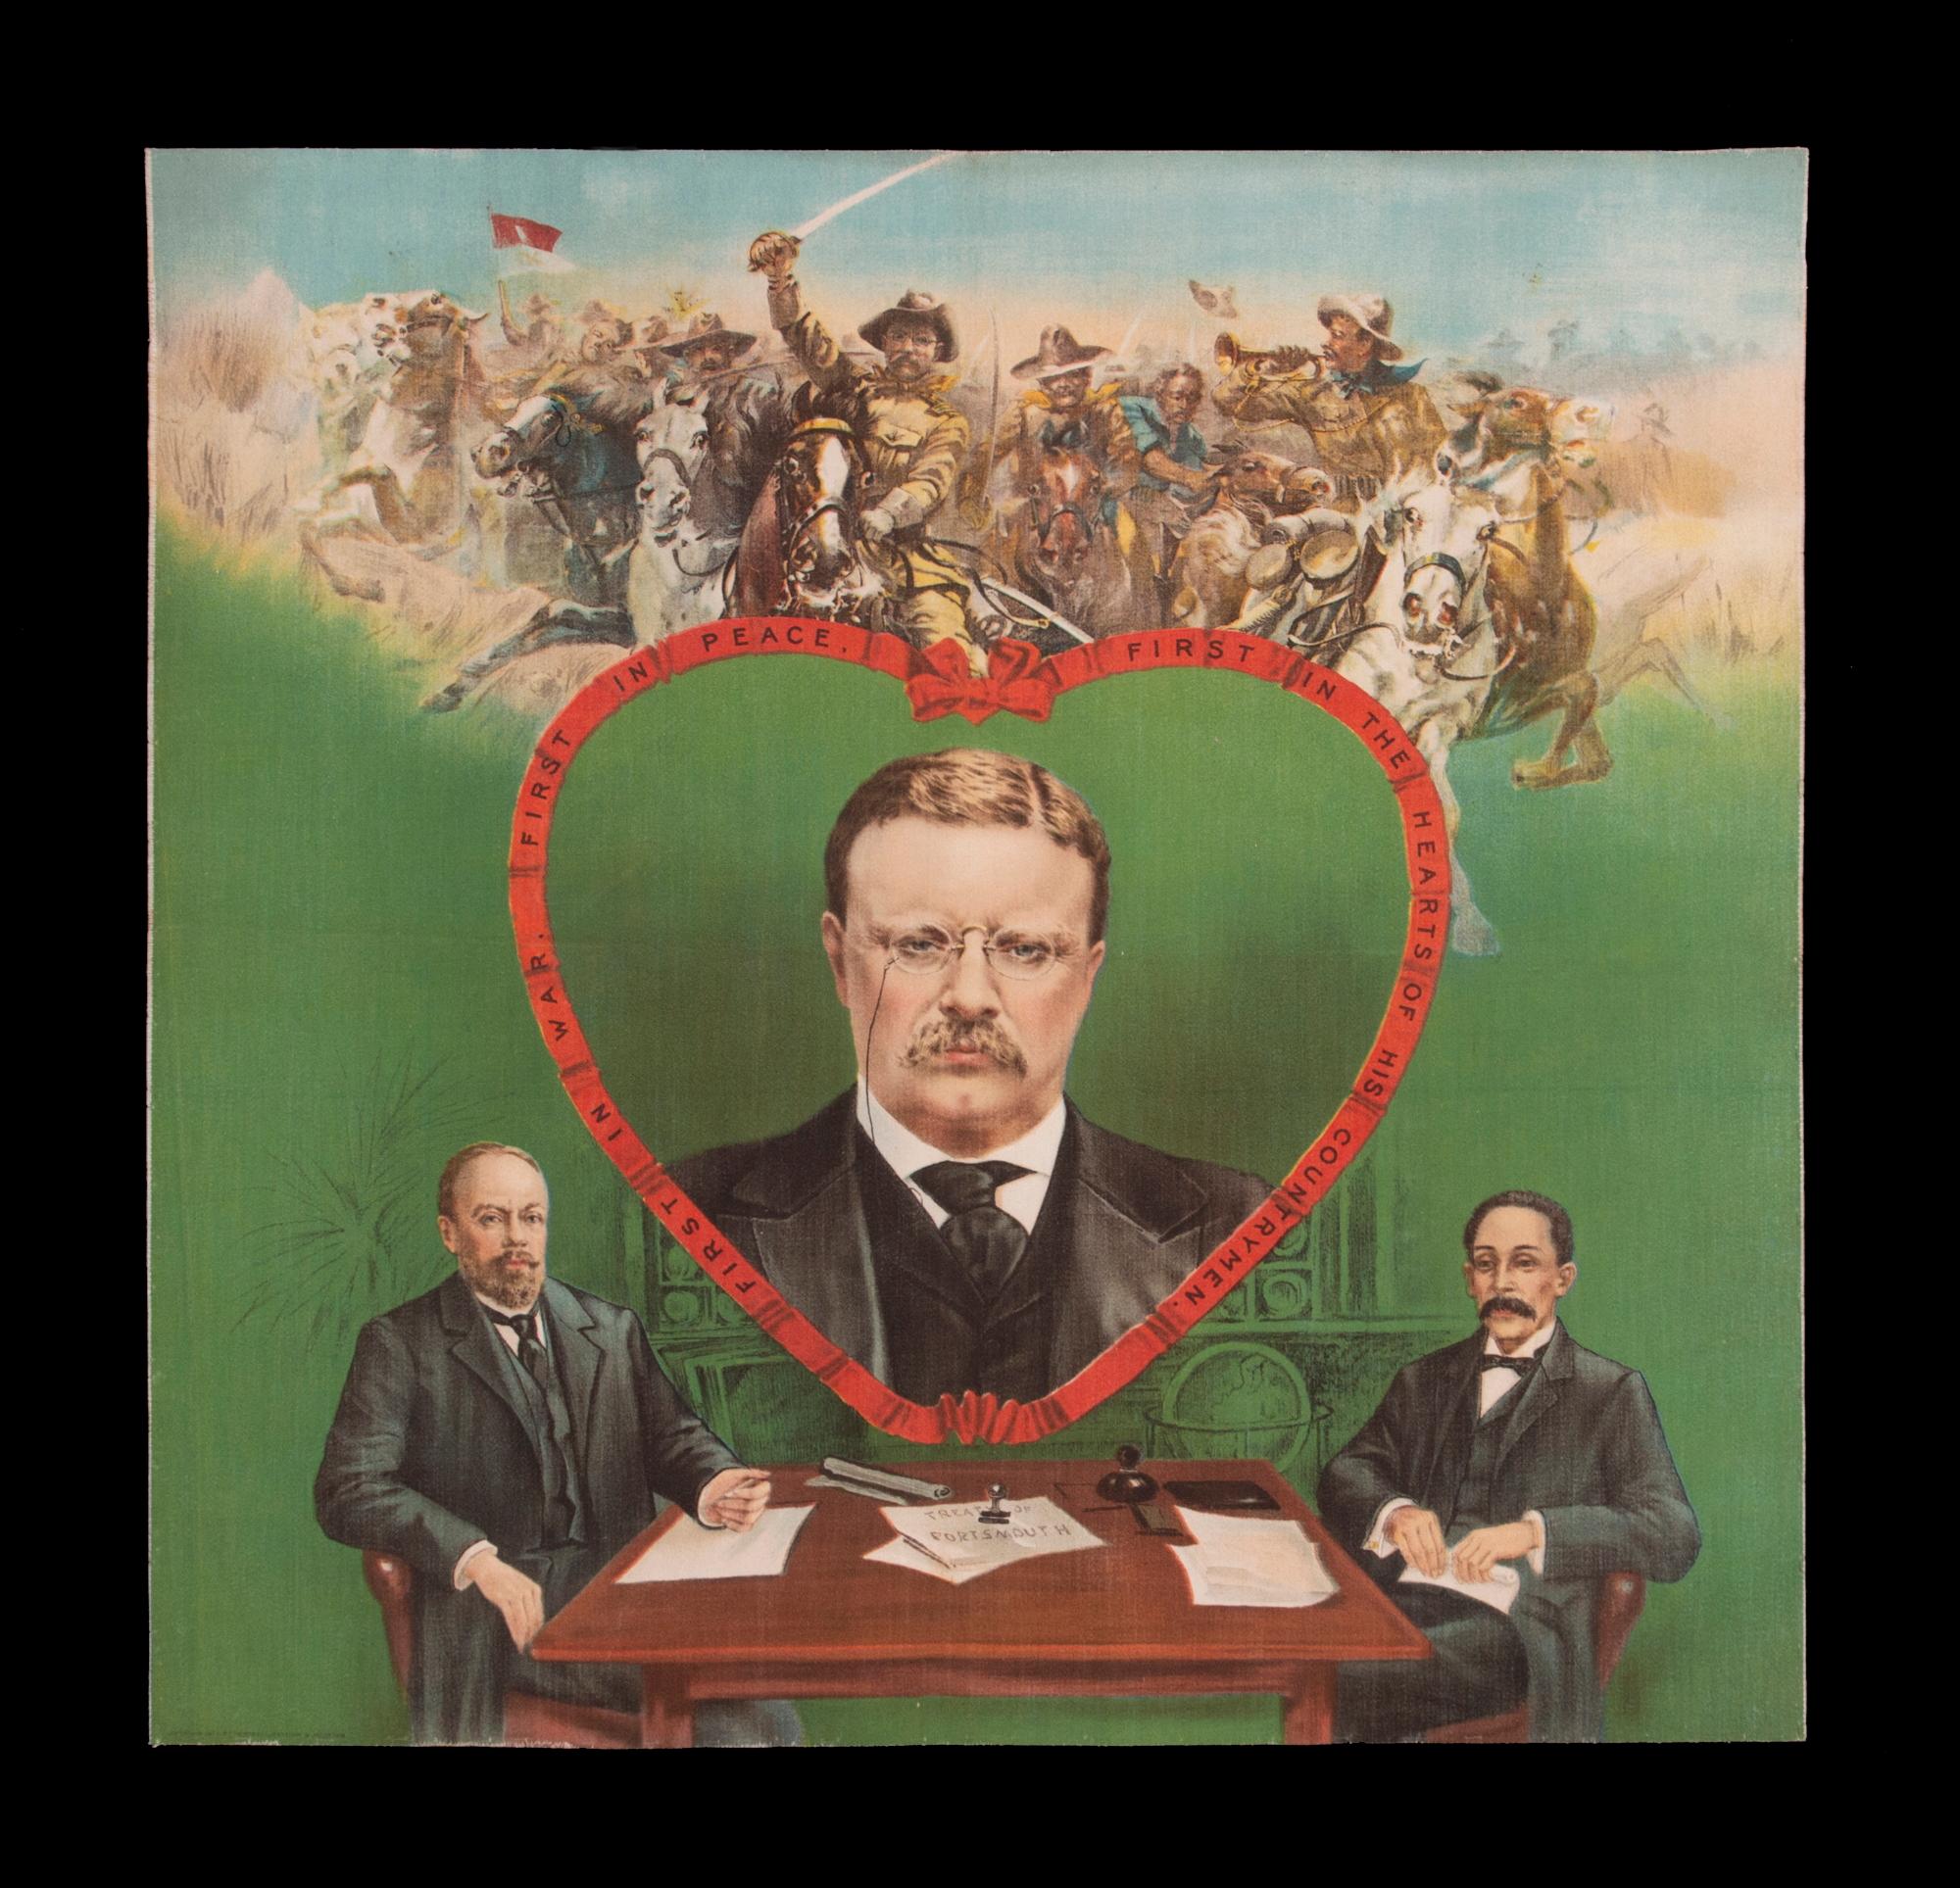 Boldly Graphic And Colorful Teddy Roosevelt Textile, With His Portrait In A Large Heart And Rough Riders Above, Made To Celebrate His Receipt Of The Nobel Prize For Peace In 1906

In 1905, President Theodore Roosevelt brokered a treaty between